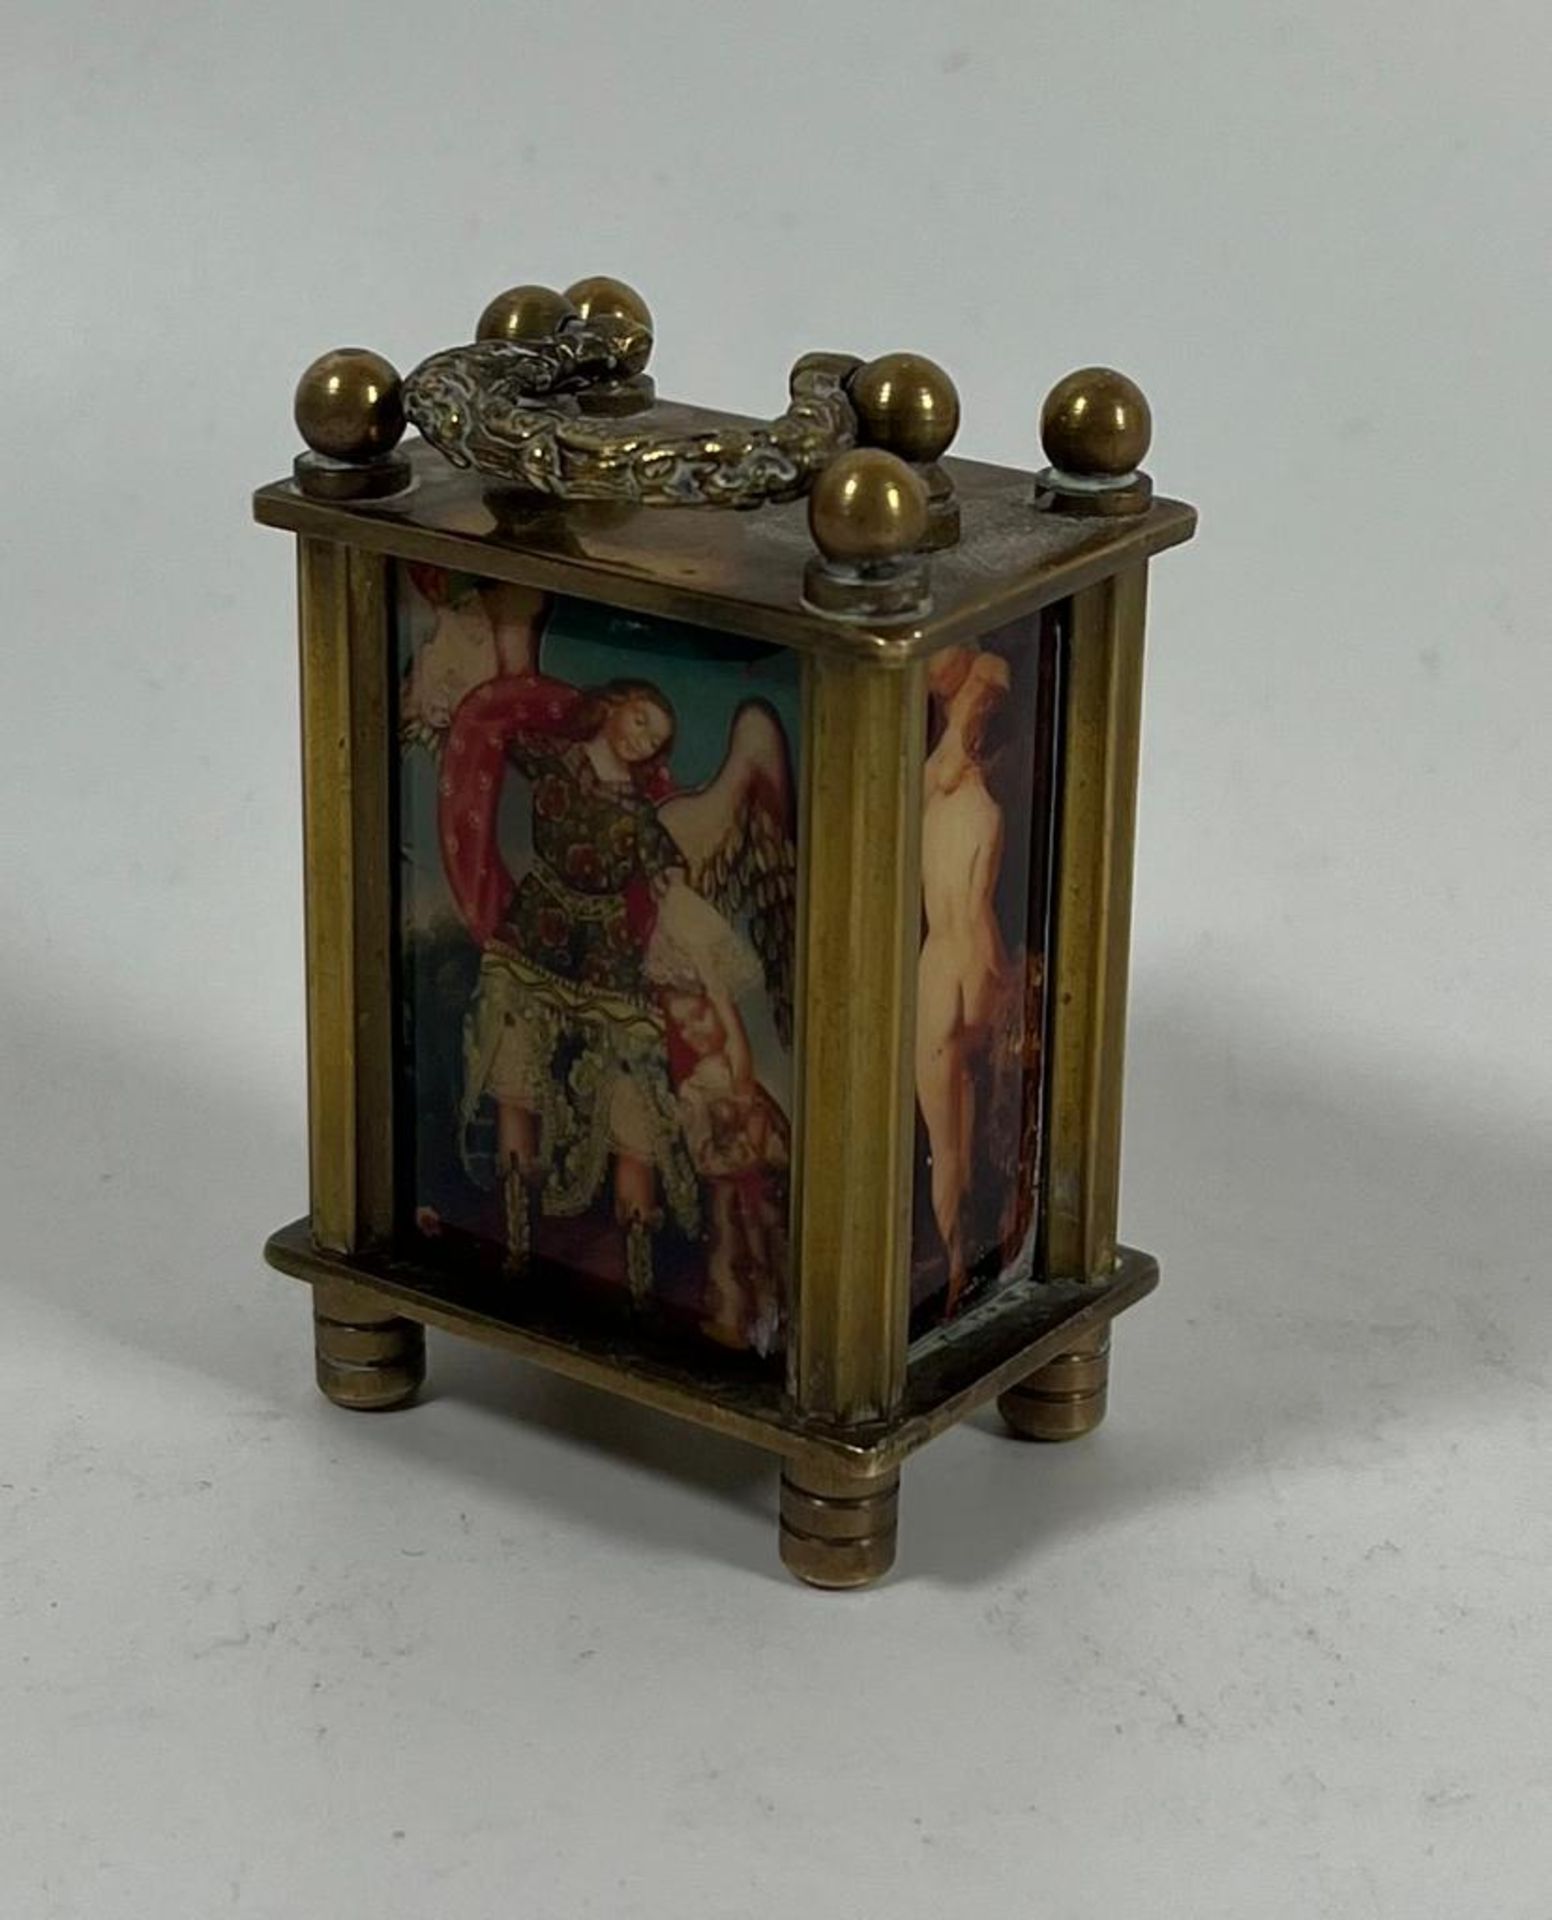 A MINIATURE BRASS WIND UP CARRIAGE CLOCK WITH CLASSICAL AND NUDE FIGURAL PANELS, HEIGHT 6CM